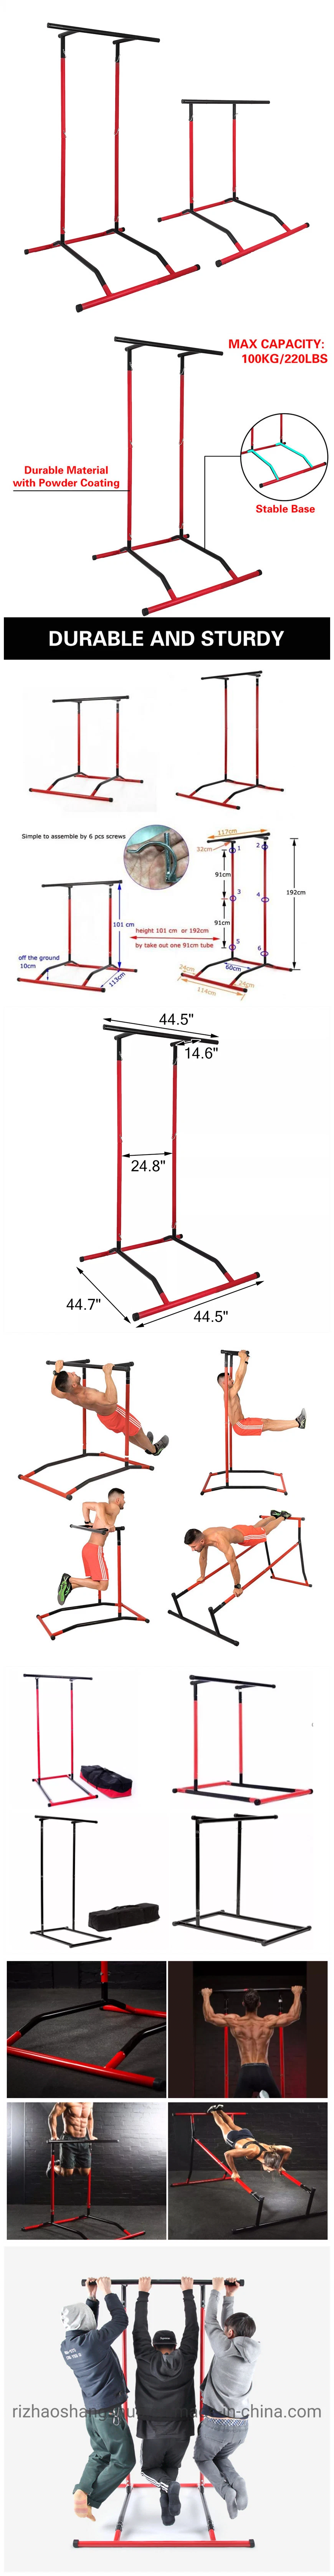 Pull up Station Outdoor Sports Equipment Gymnastic Fitness Rack DIP Stand Push UPS Parallel Bars